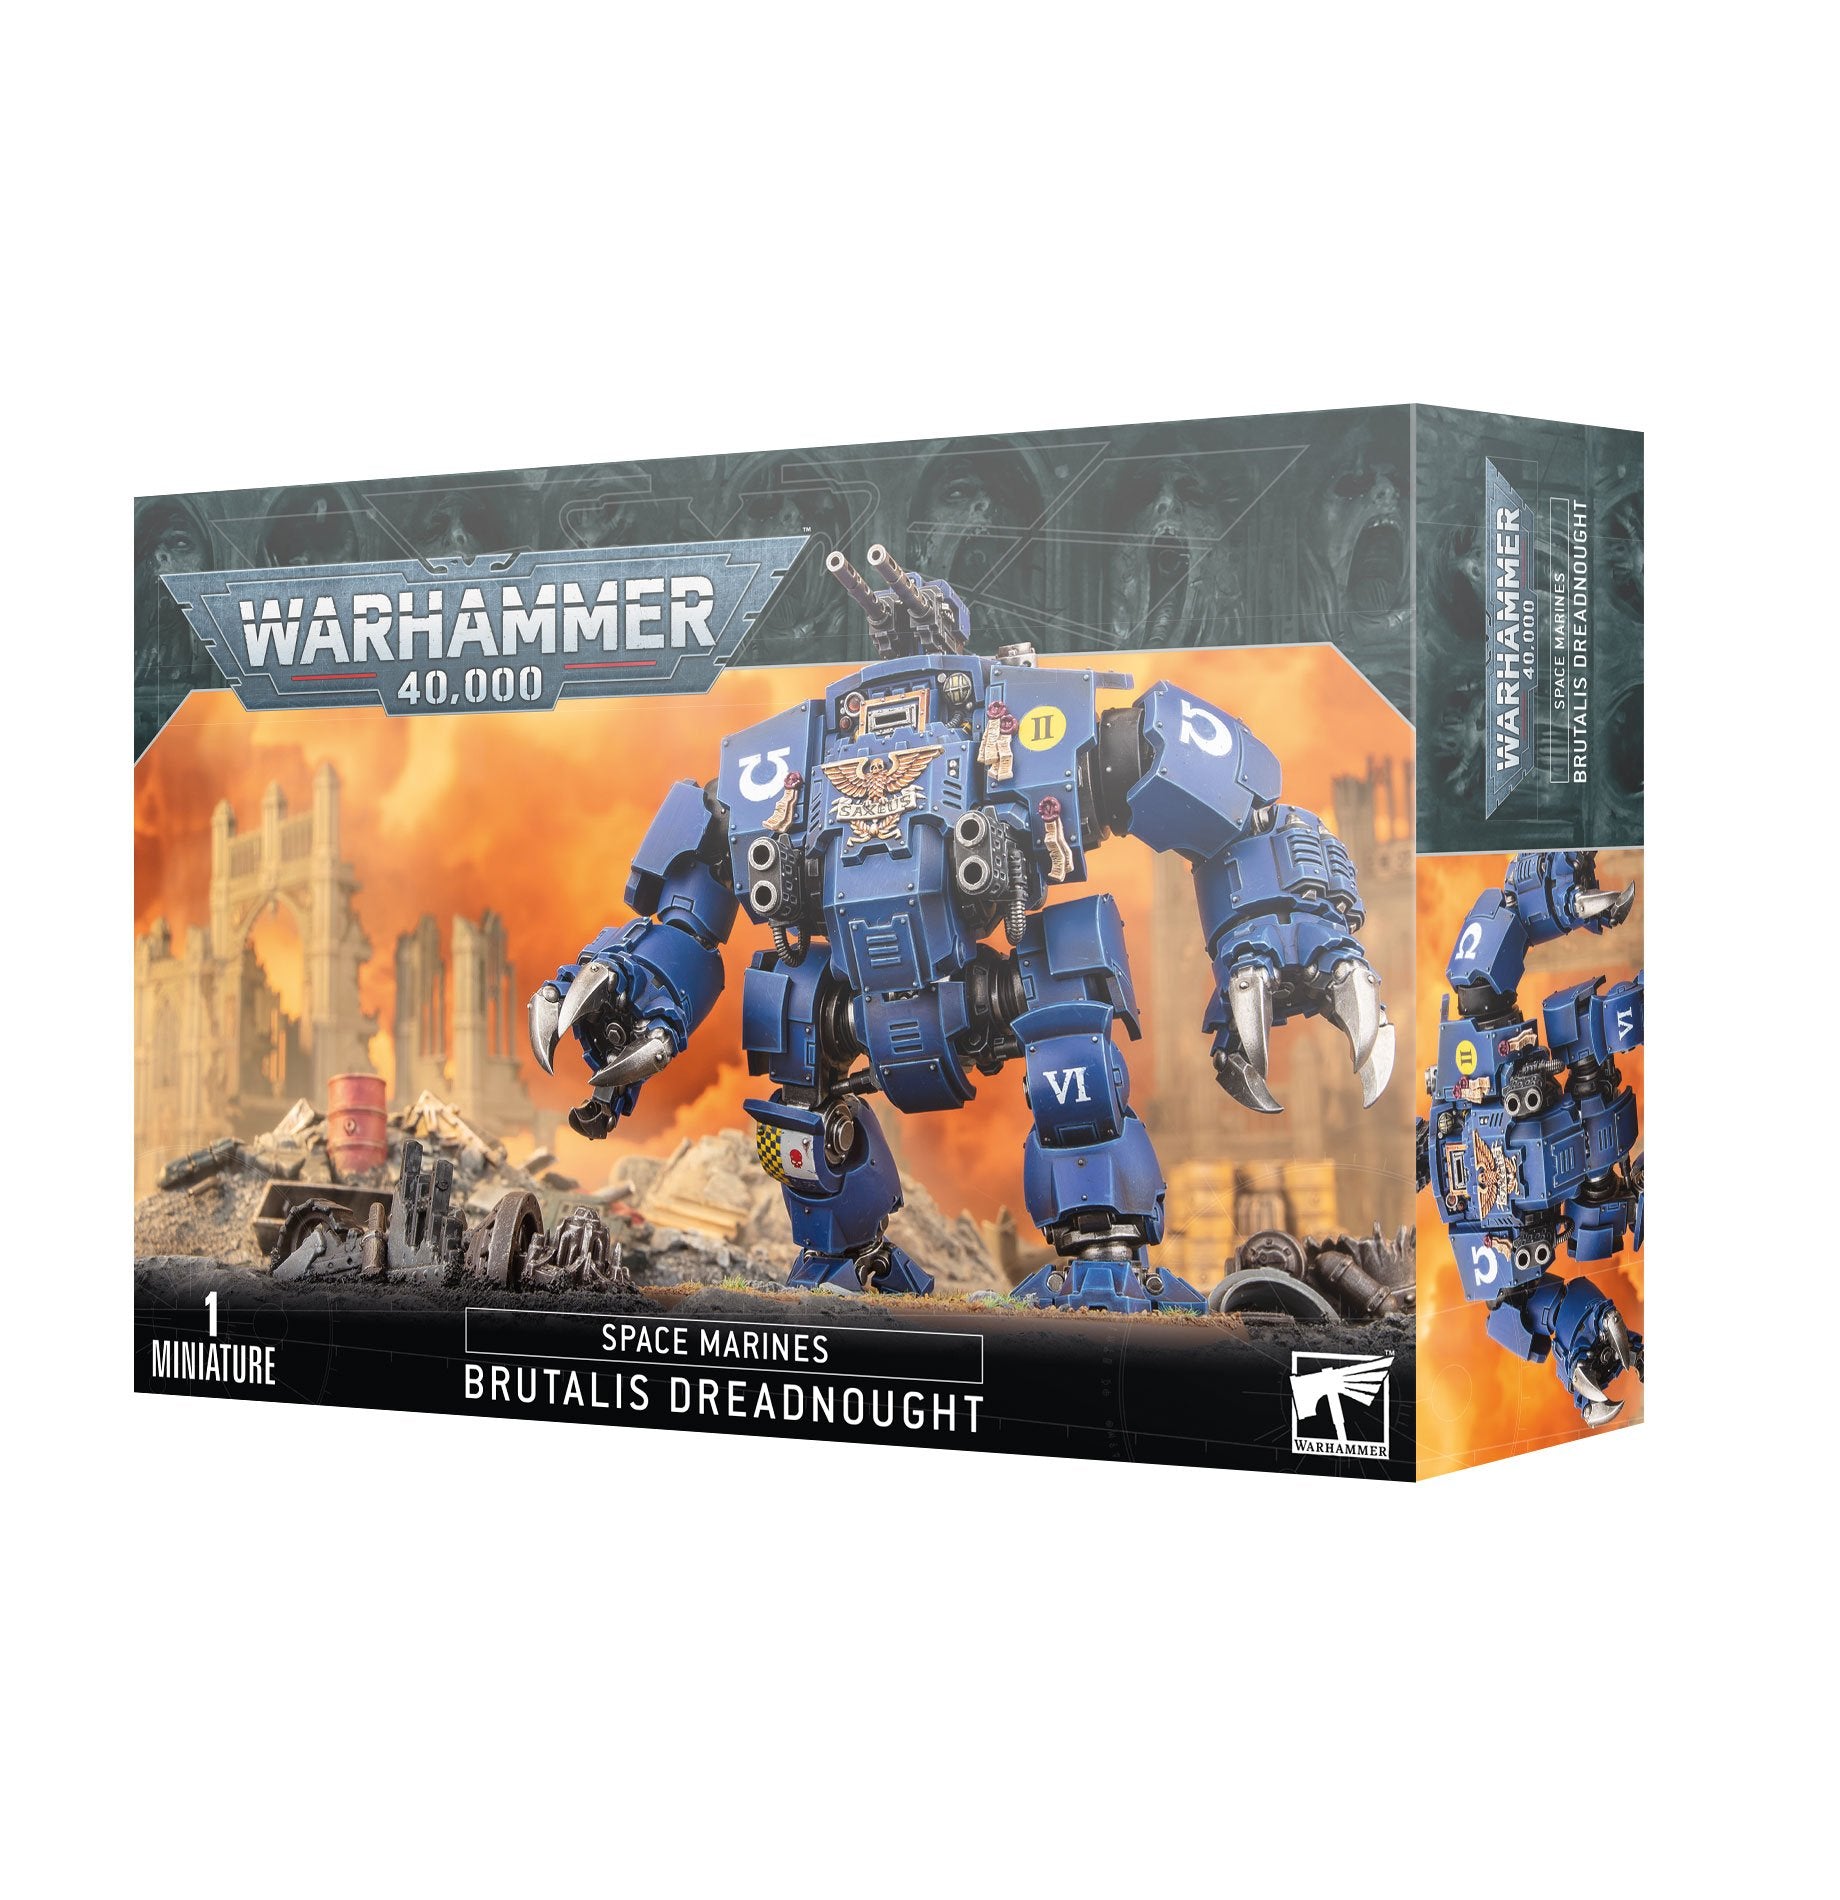 Space Marines: Brutalis Dreadnought - Pre Order 16% OFF! - Release Date 14/10/23 - Loaded Dice Barry Vale of Glamorgan CF64 3HD